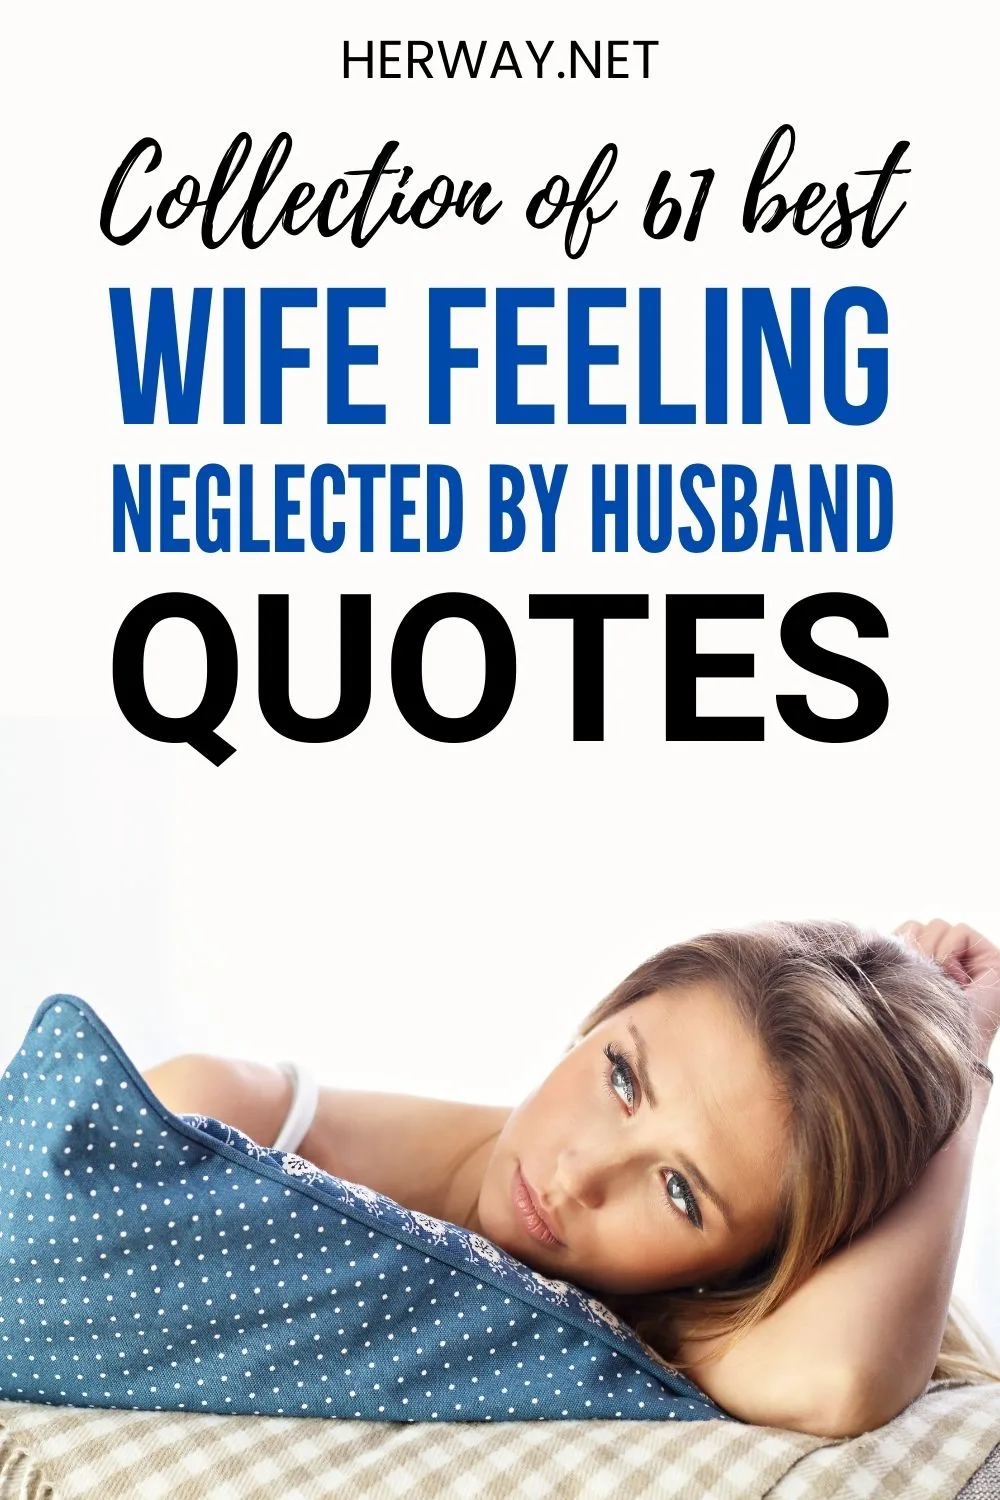 61 Wife Feeling Neglected By Husband Quotes And Sayings Pinterest